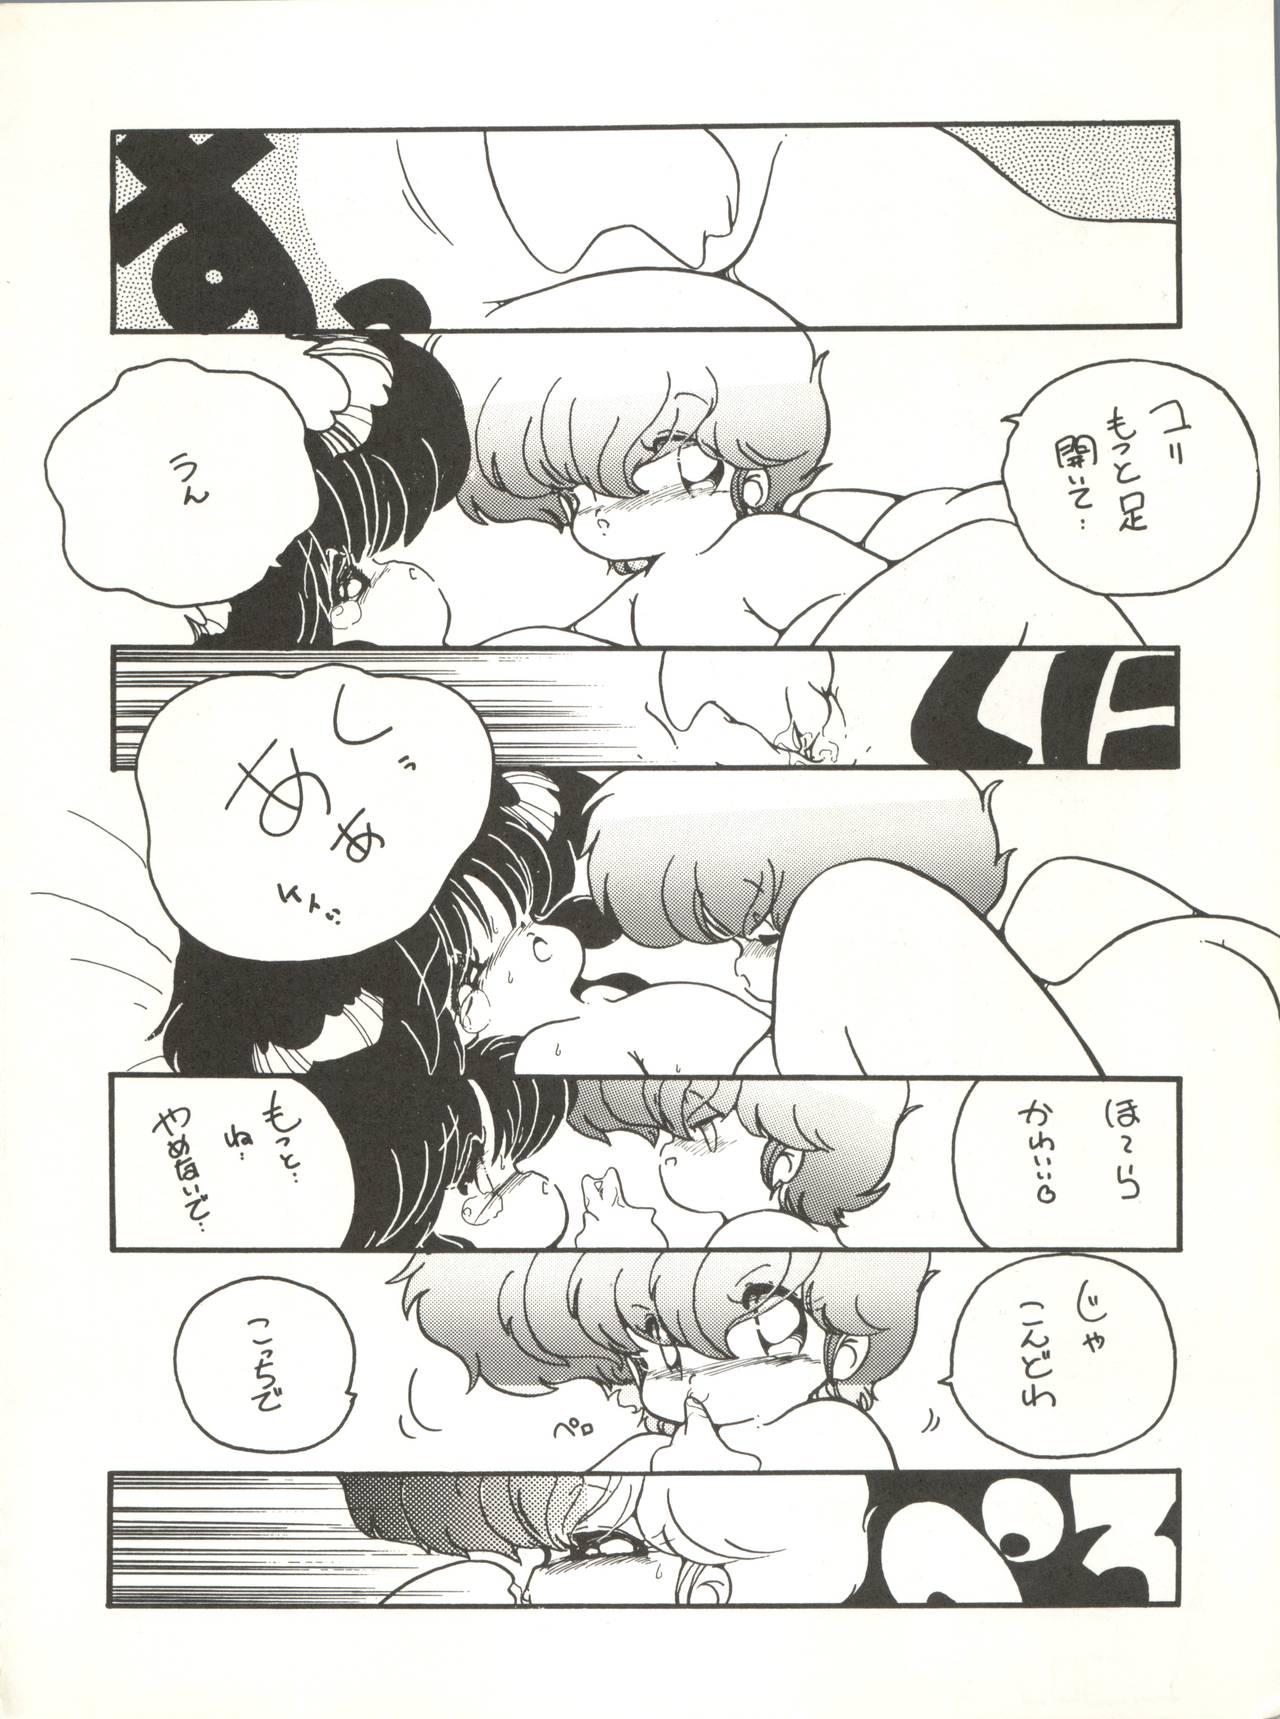 Stepbrother X DIGITAL ver.1.0 - Dirty pair Family - Page 8